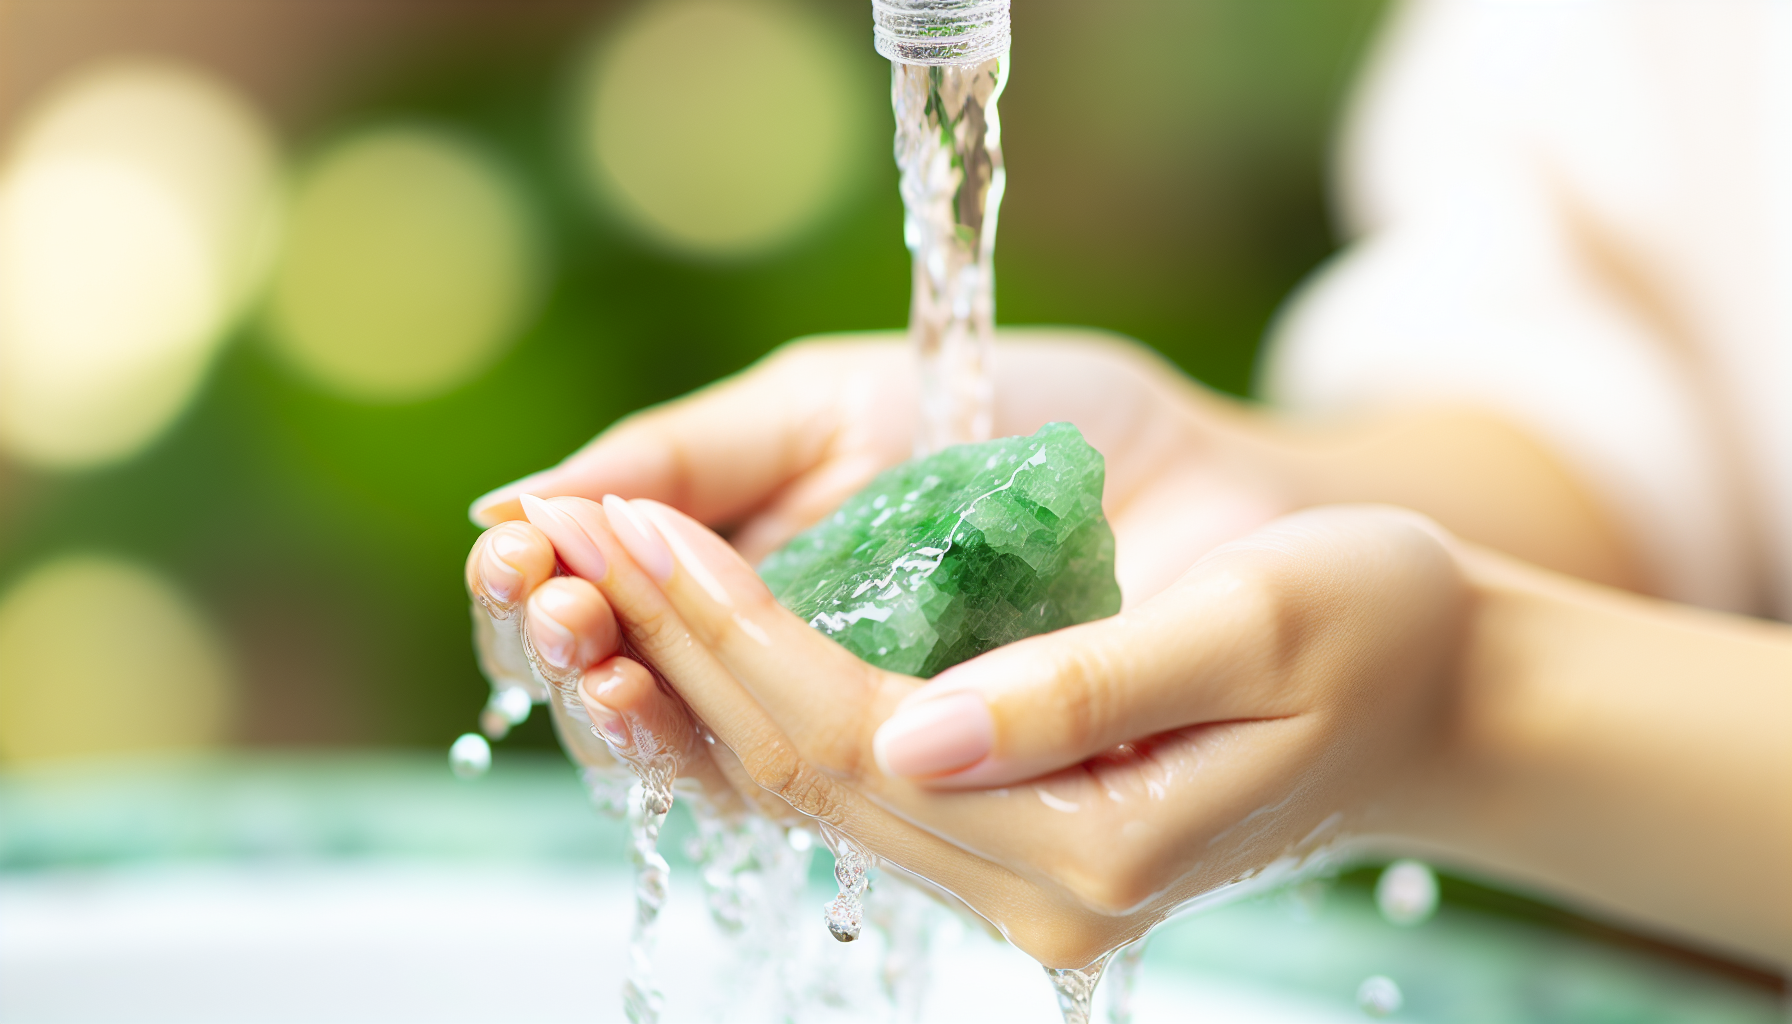 Person holding a piece of Green Aventurine, a salt safe crystal, under running water for cleansing